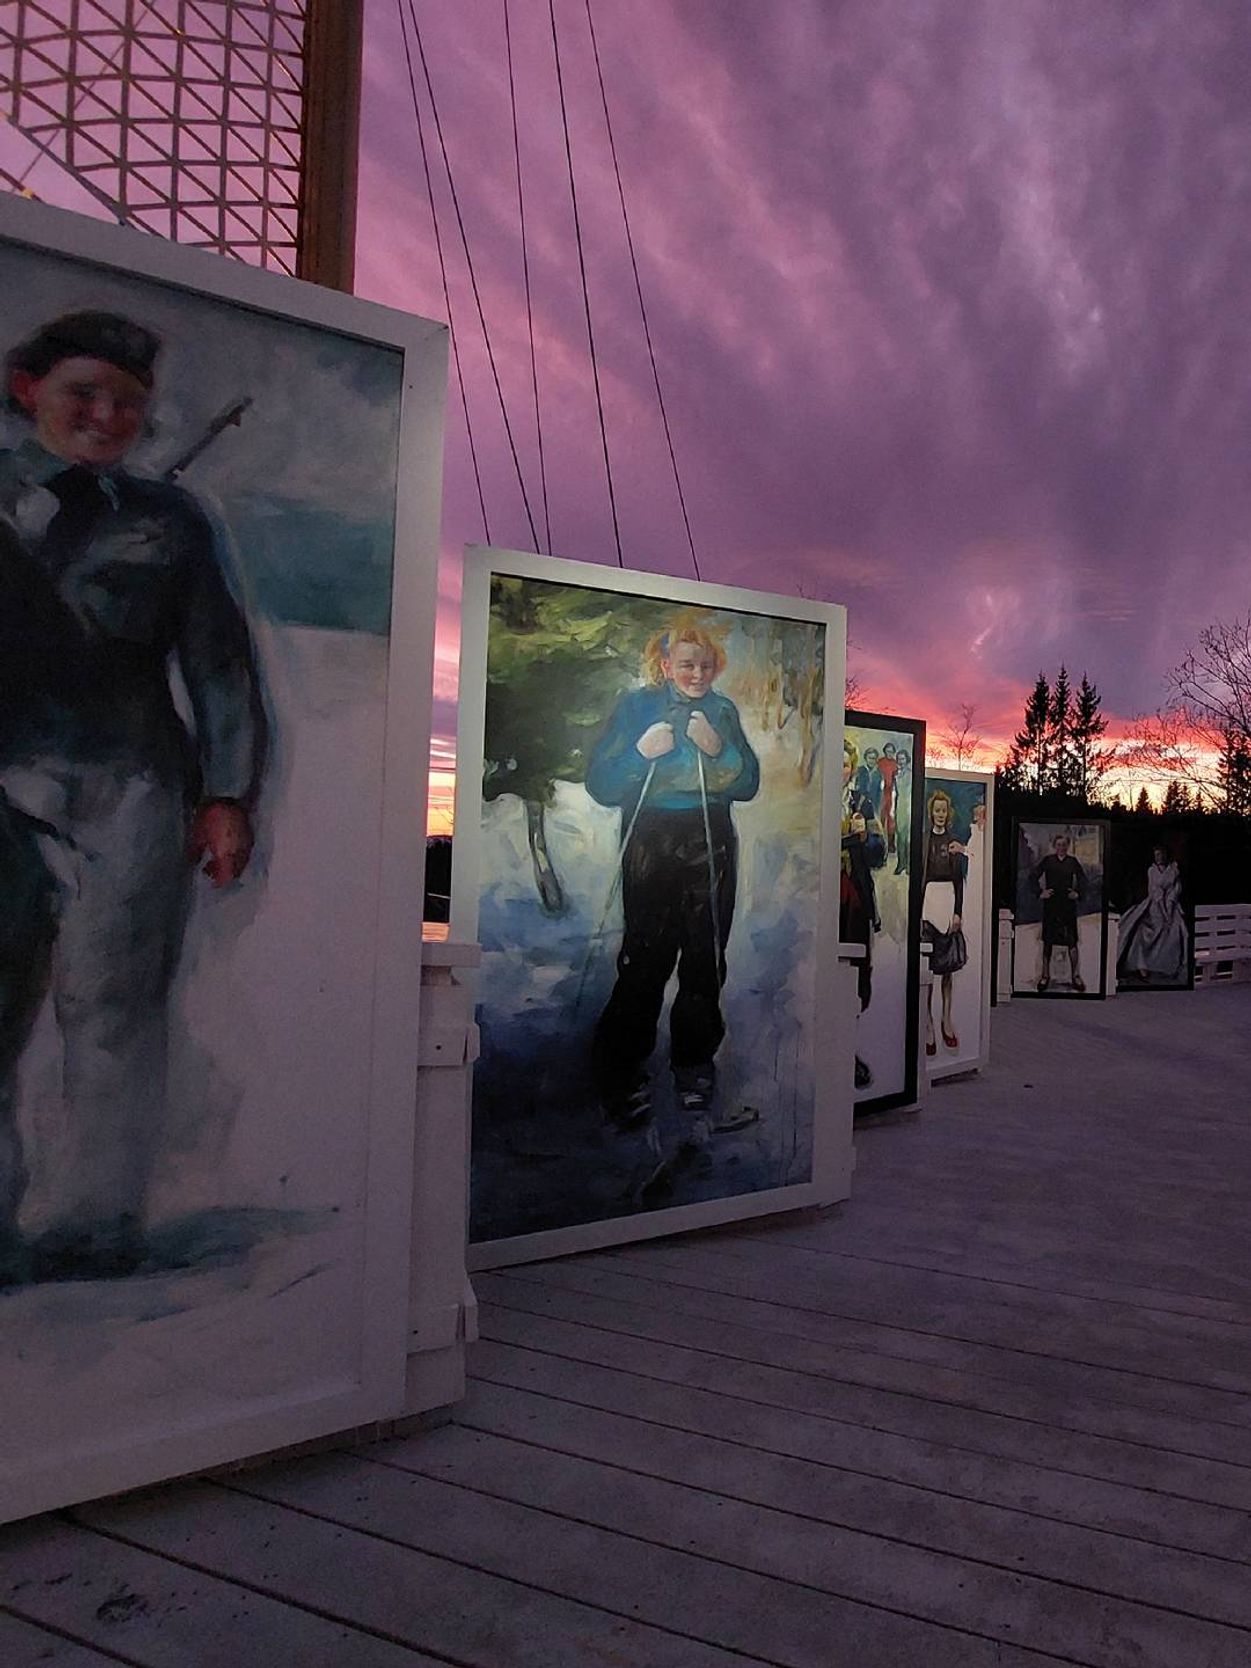 A boardwalk filled with painted portraits. Next Avenue, Rose Castle, Norway